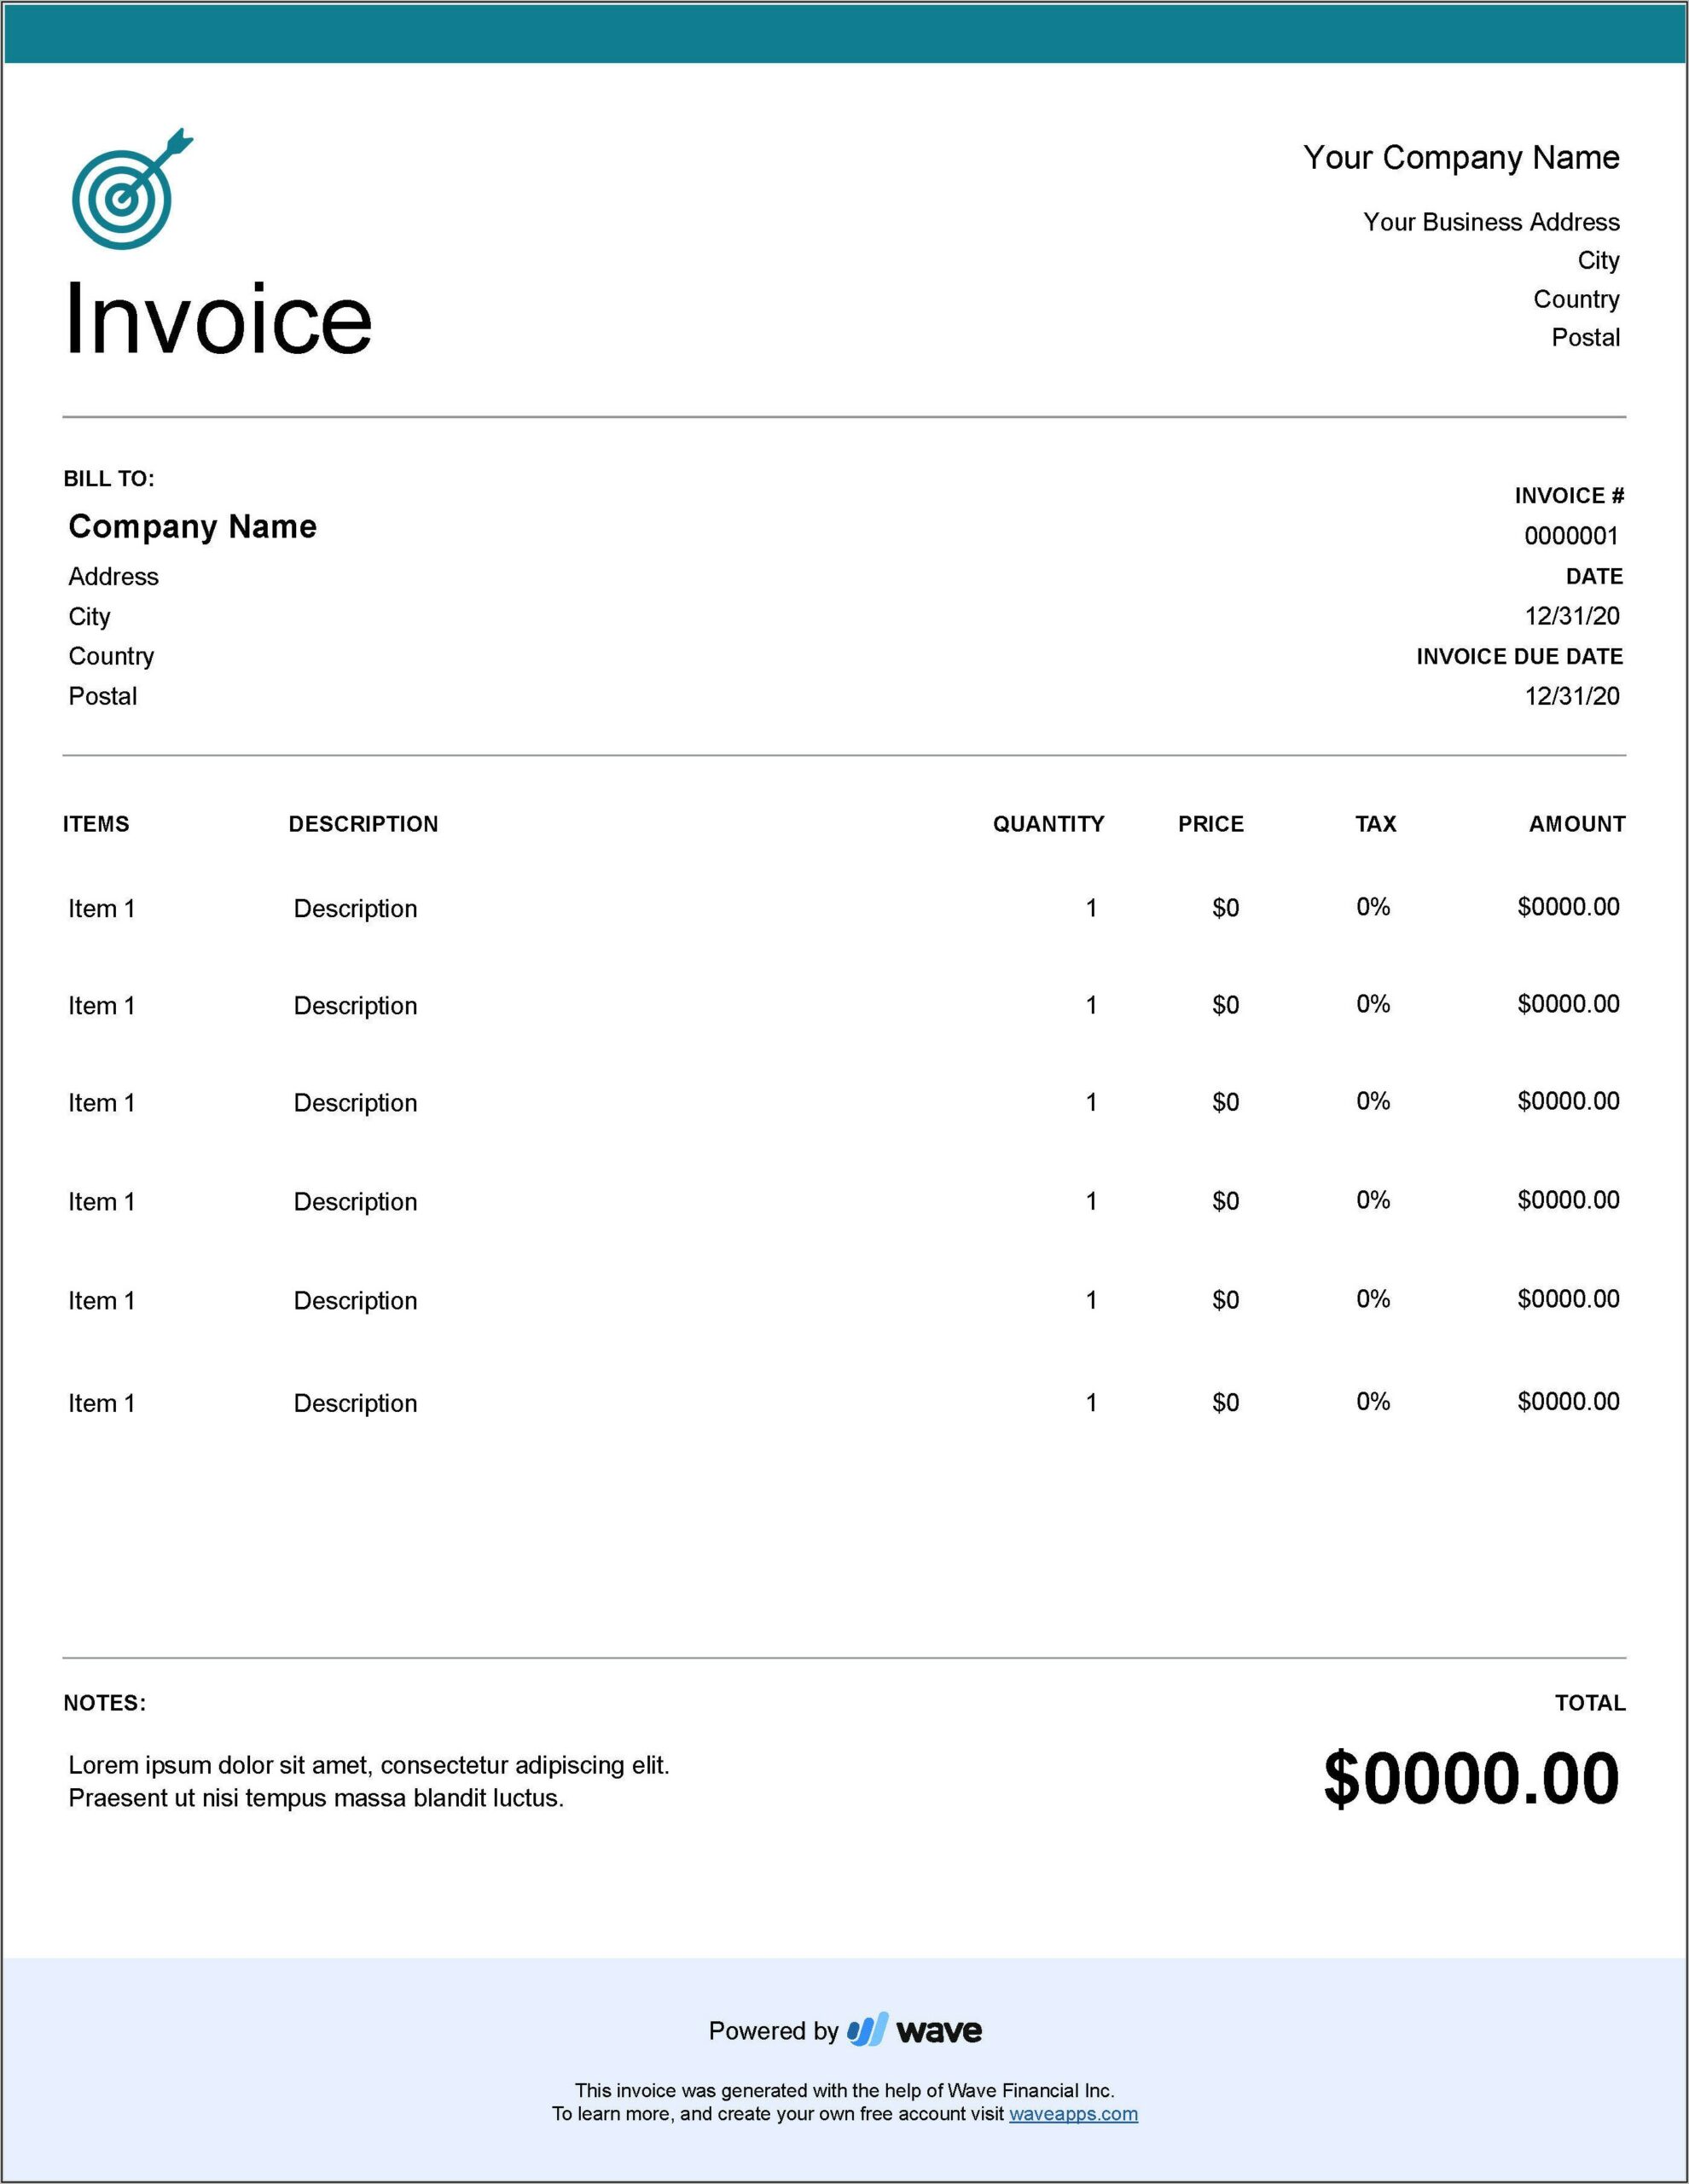 Invoice For Work Carried Out Template